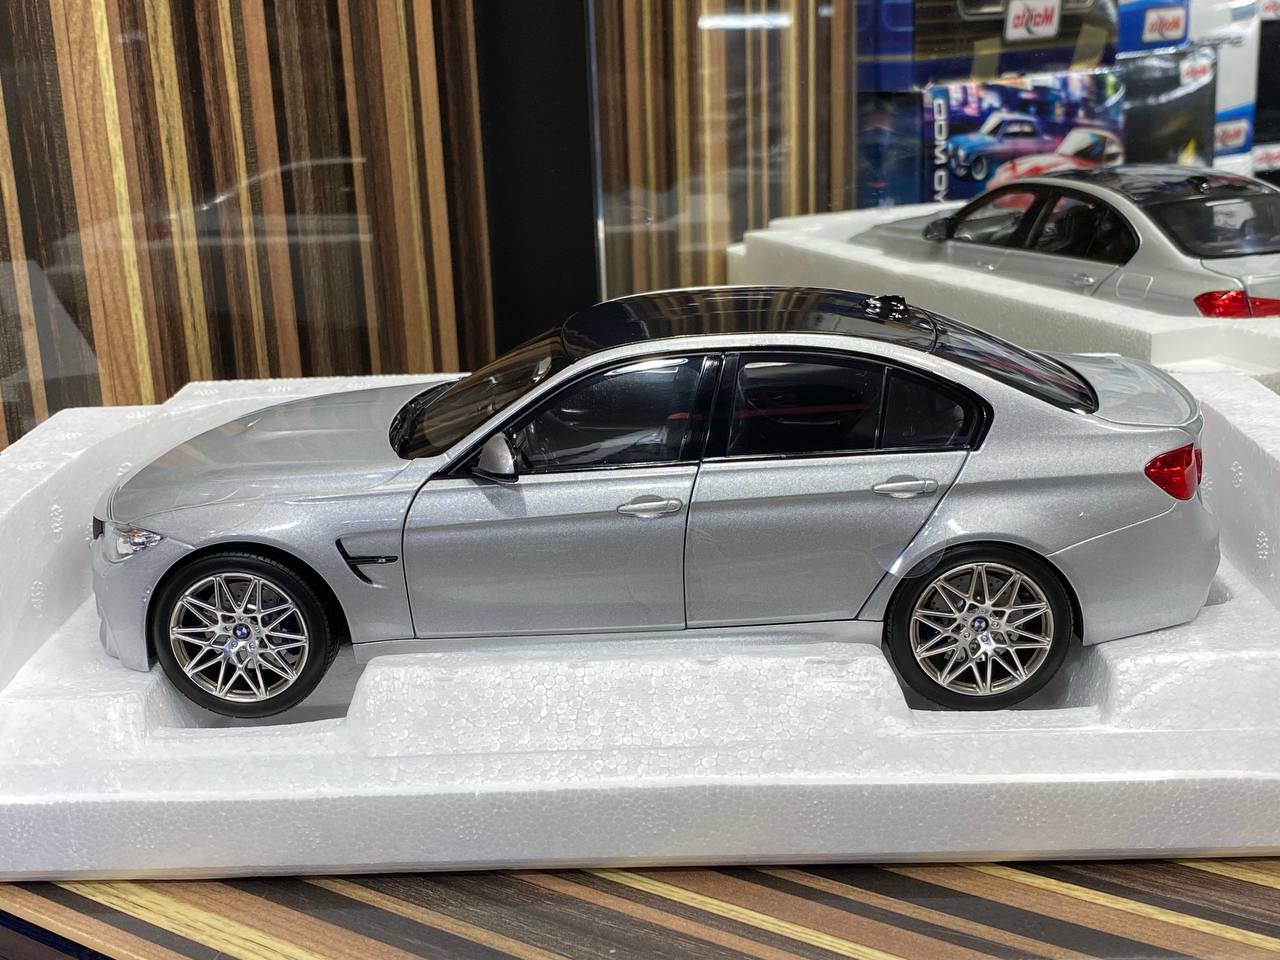 1/18 Diecast BMW M3 Competition Silver Norev Scale Model Car